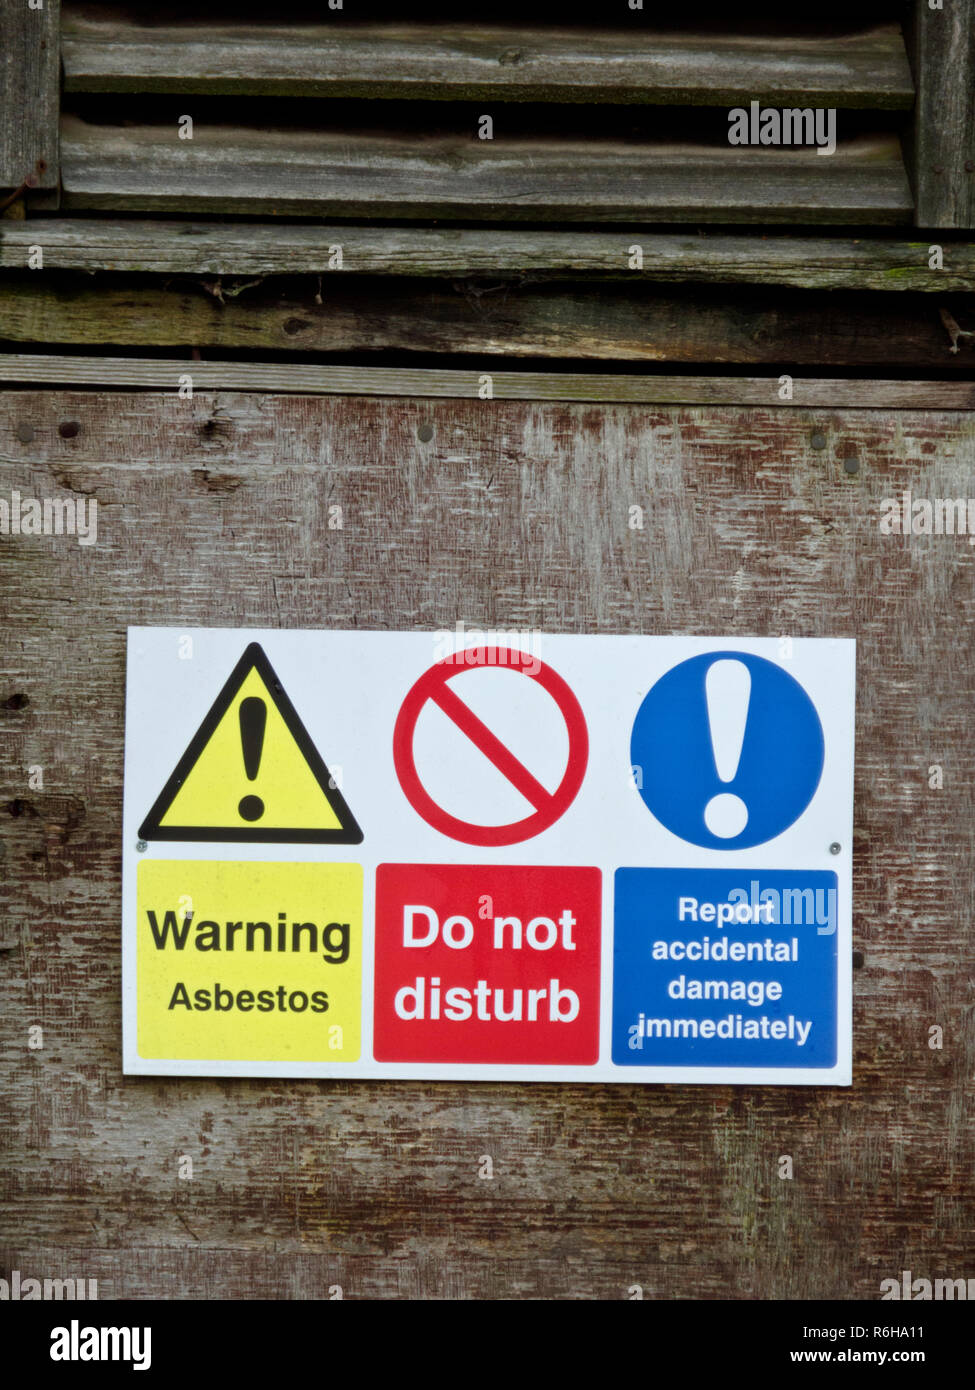 Health & Safety Warning Signs for Asbestos and Do Not Disturb, UK Stock Photo